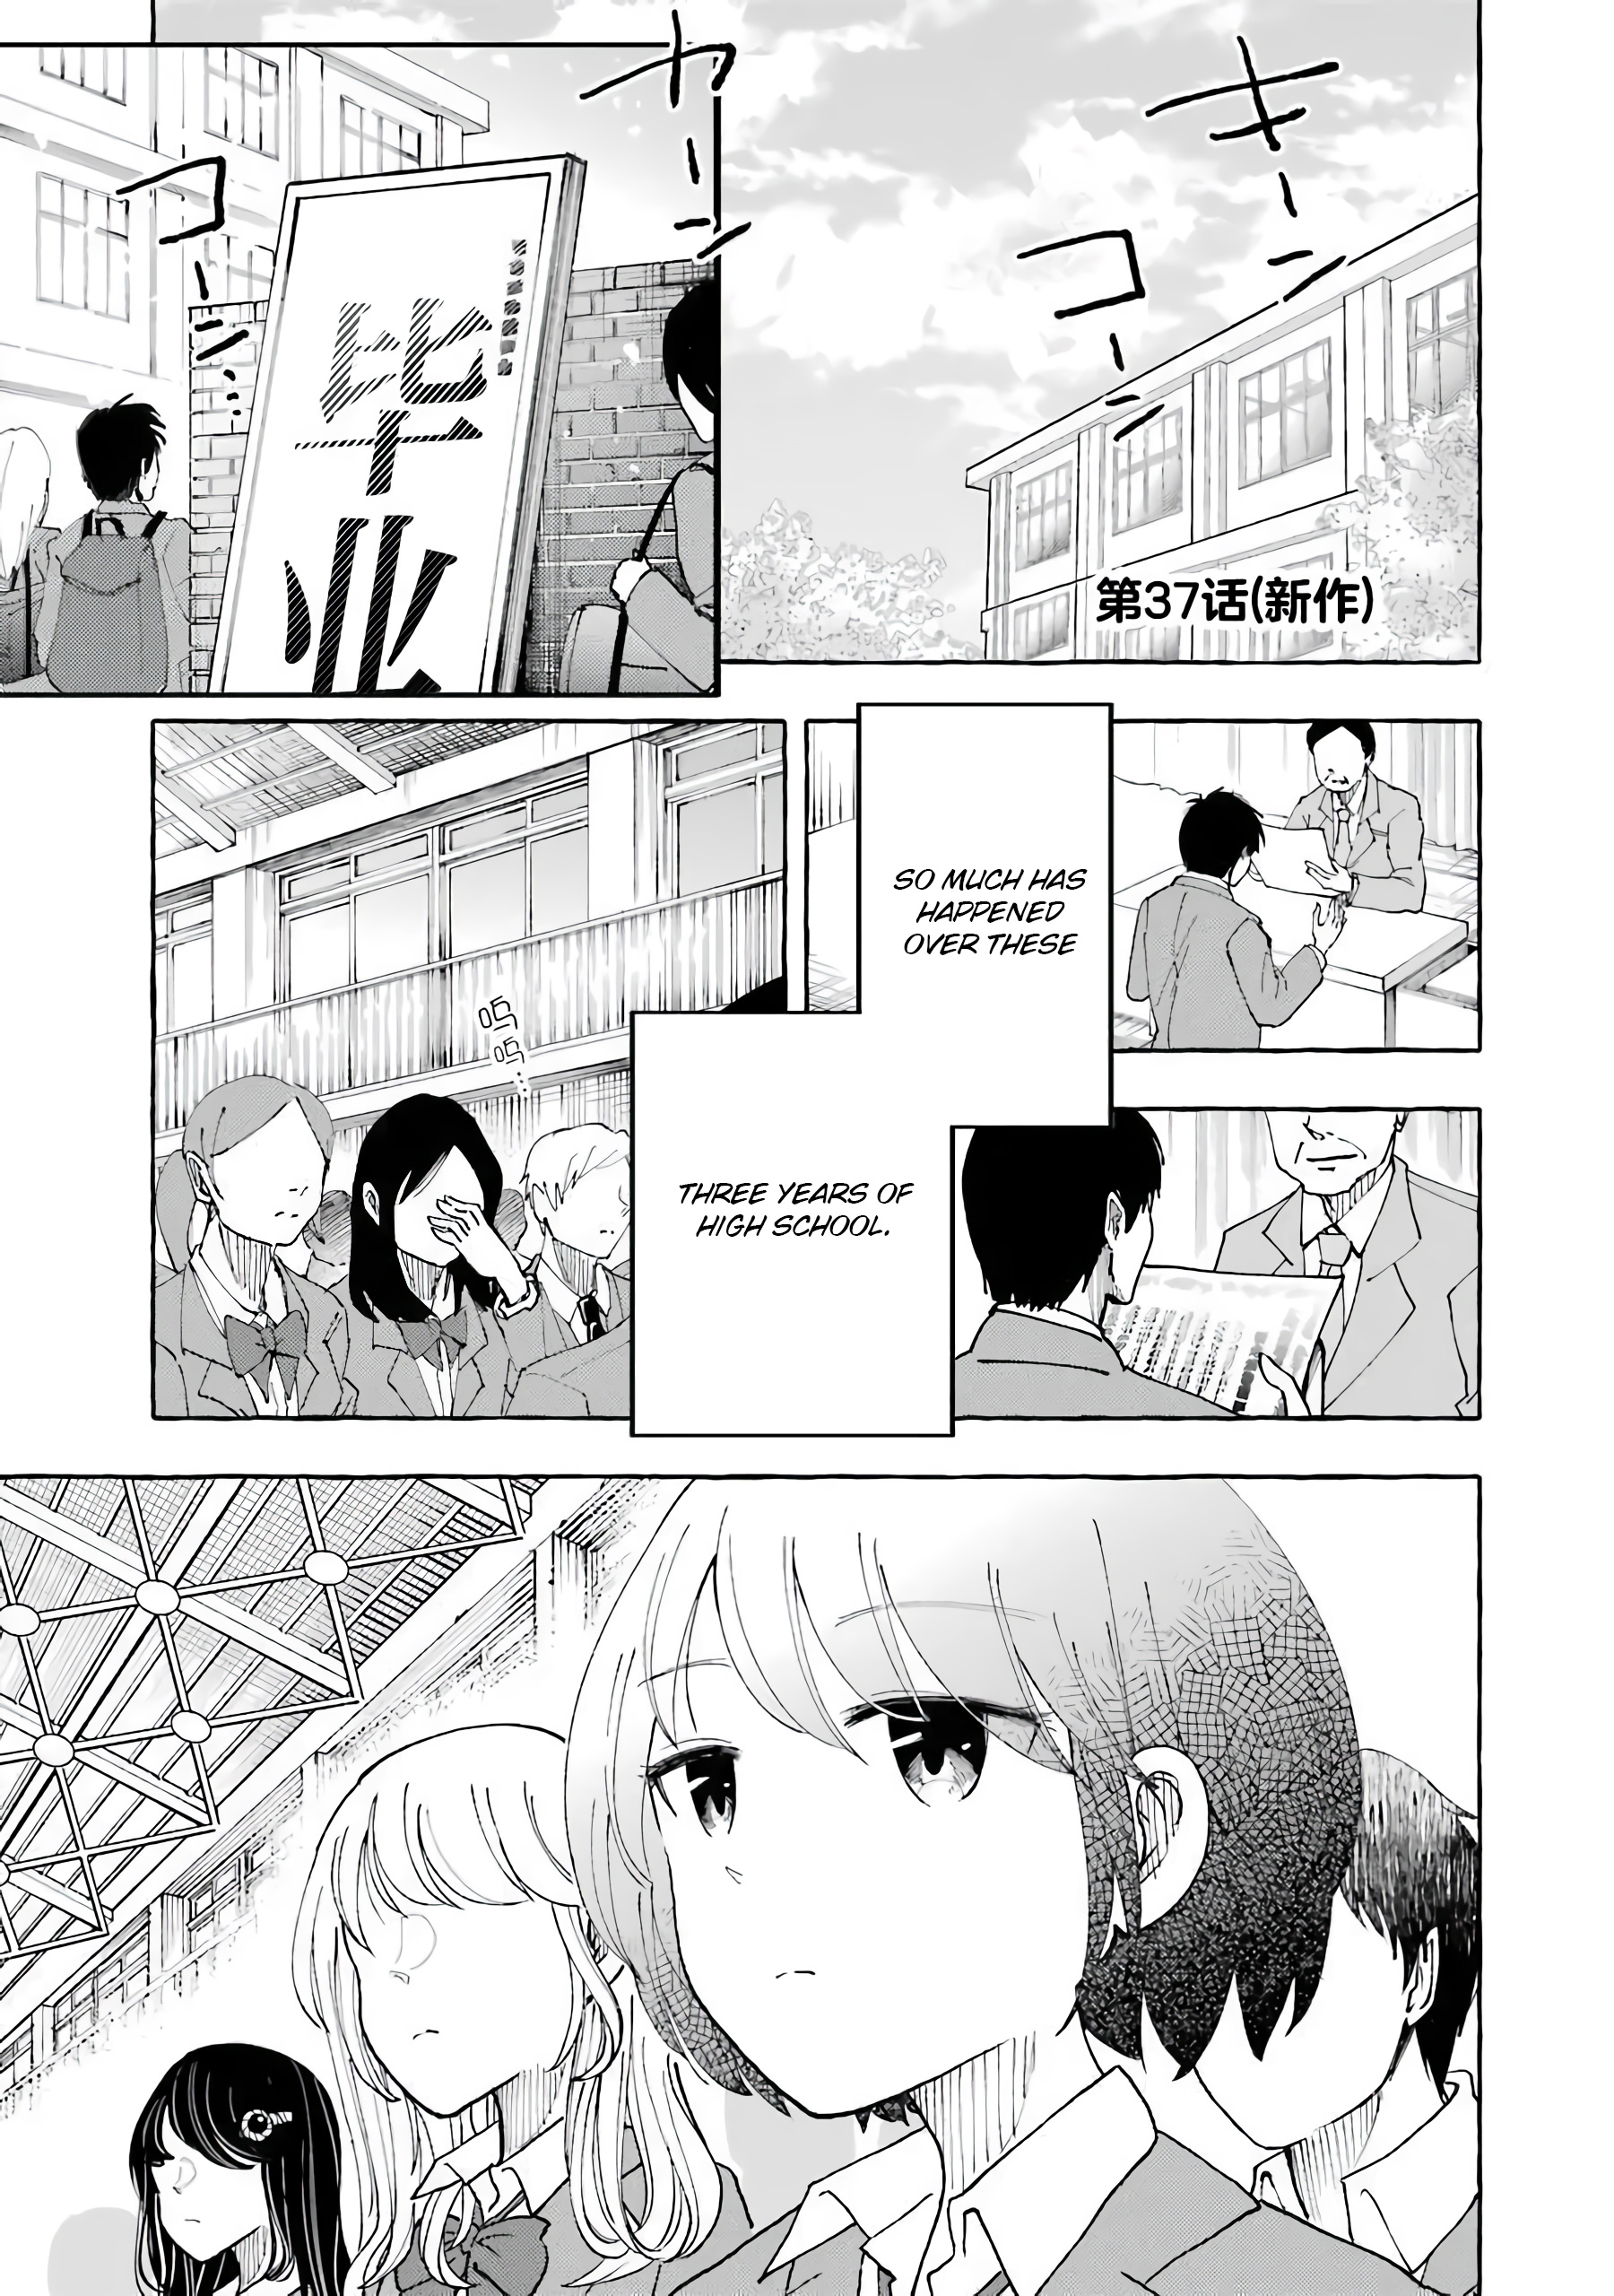 Gal To Bocchi (Serialization) Vol.2 Chapter 37